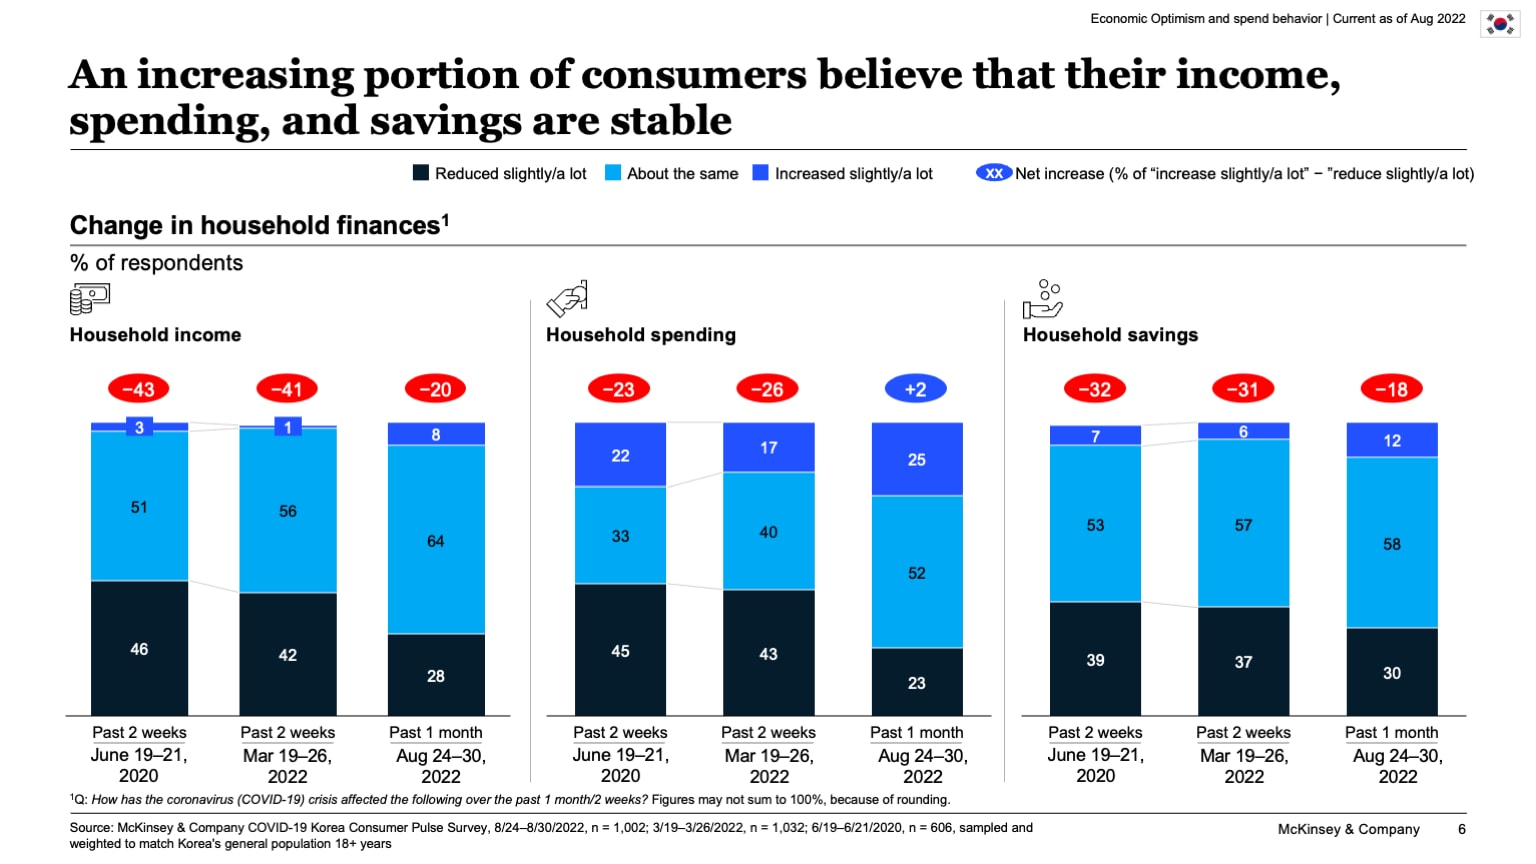 An increasing portion of consumers believe that their income, spending, and savings are stable